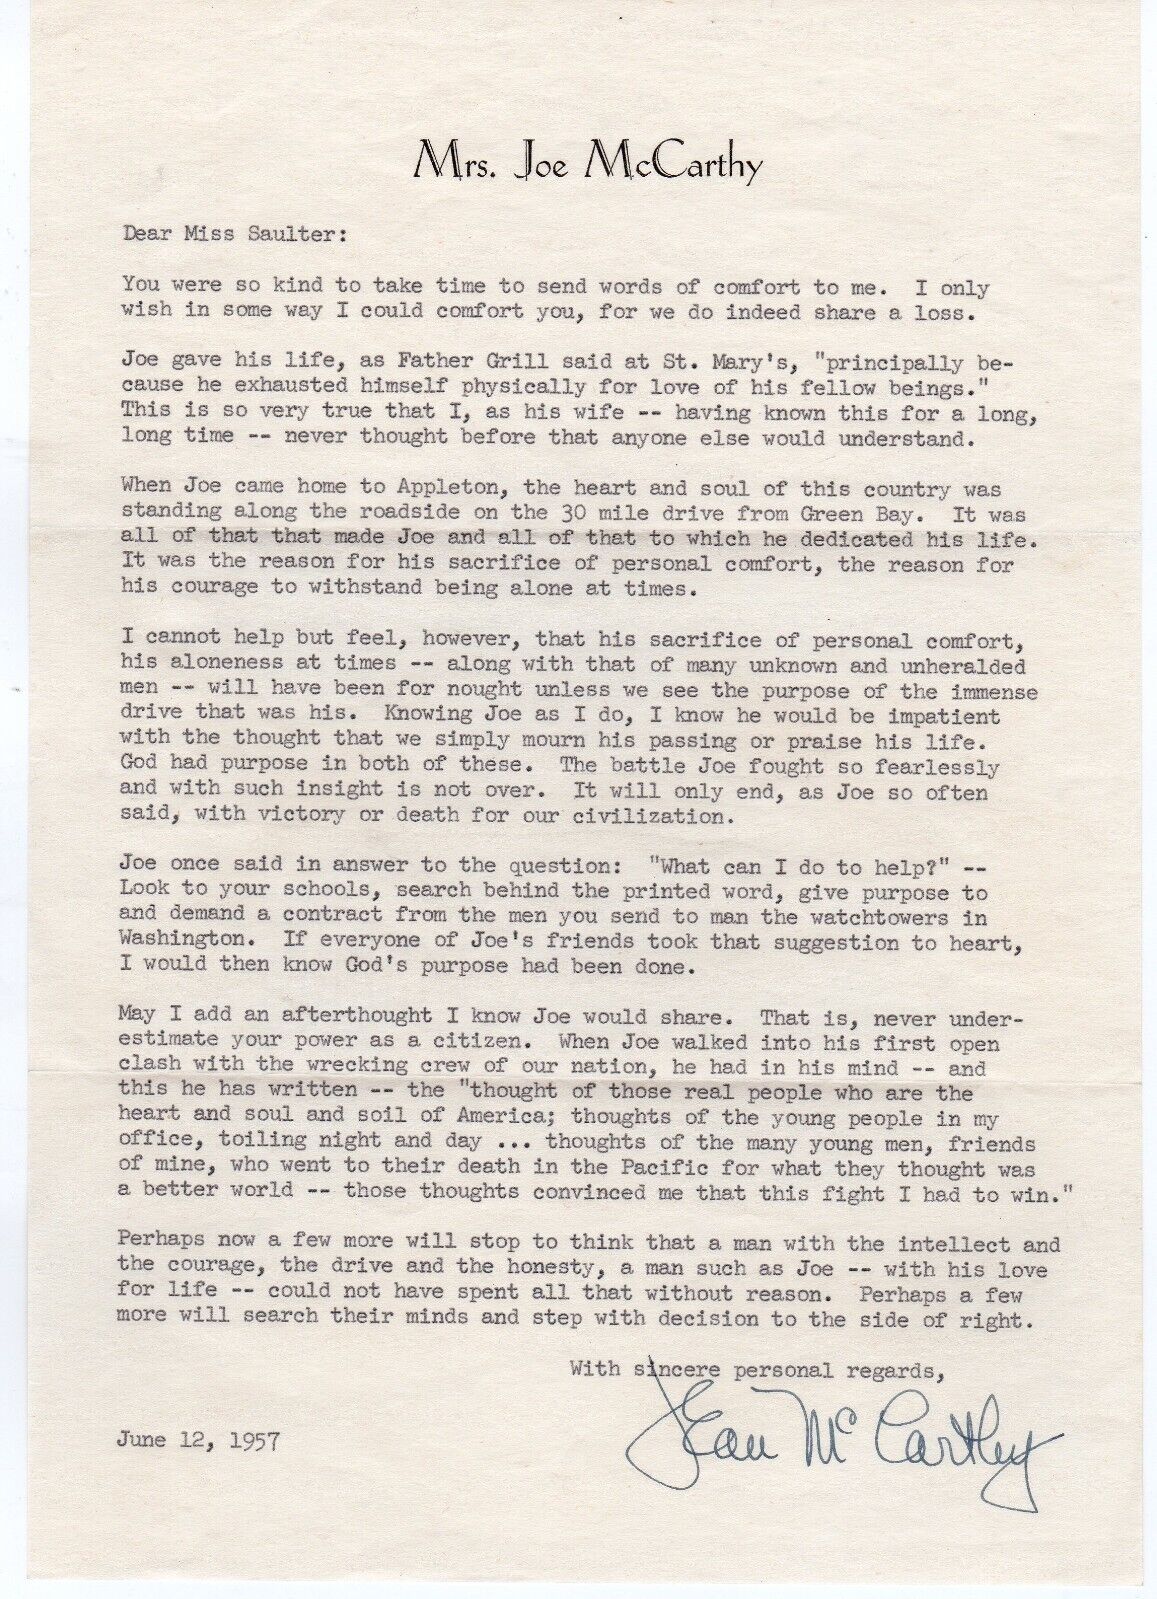 1957 Letter Mrs. Joe McCarthy, Shortly After His Death